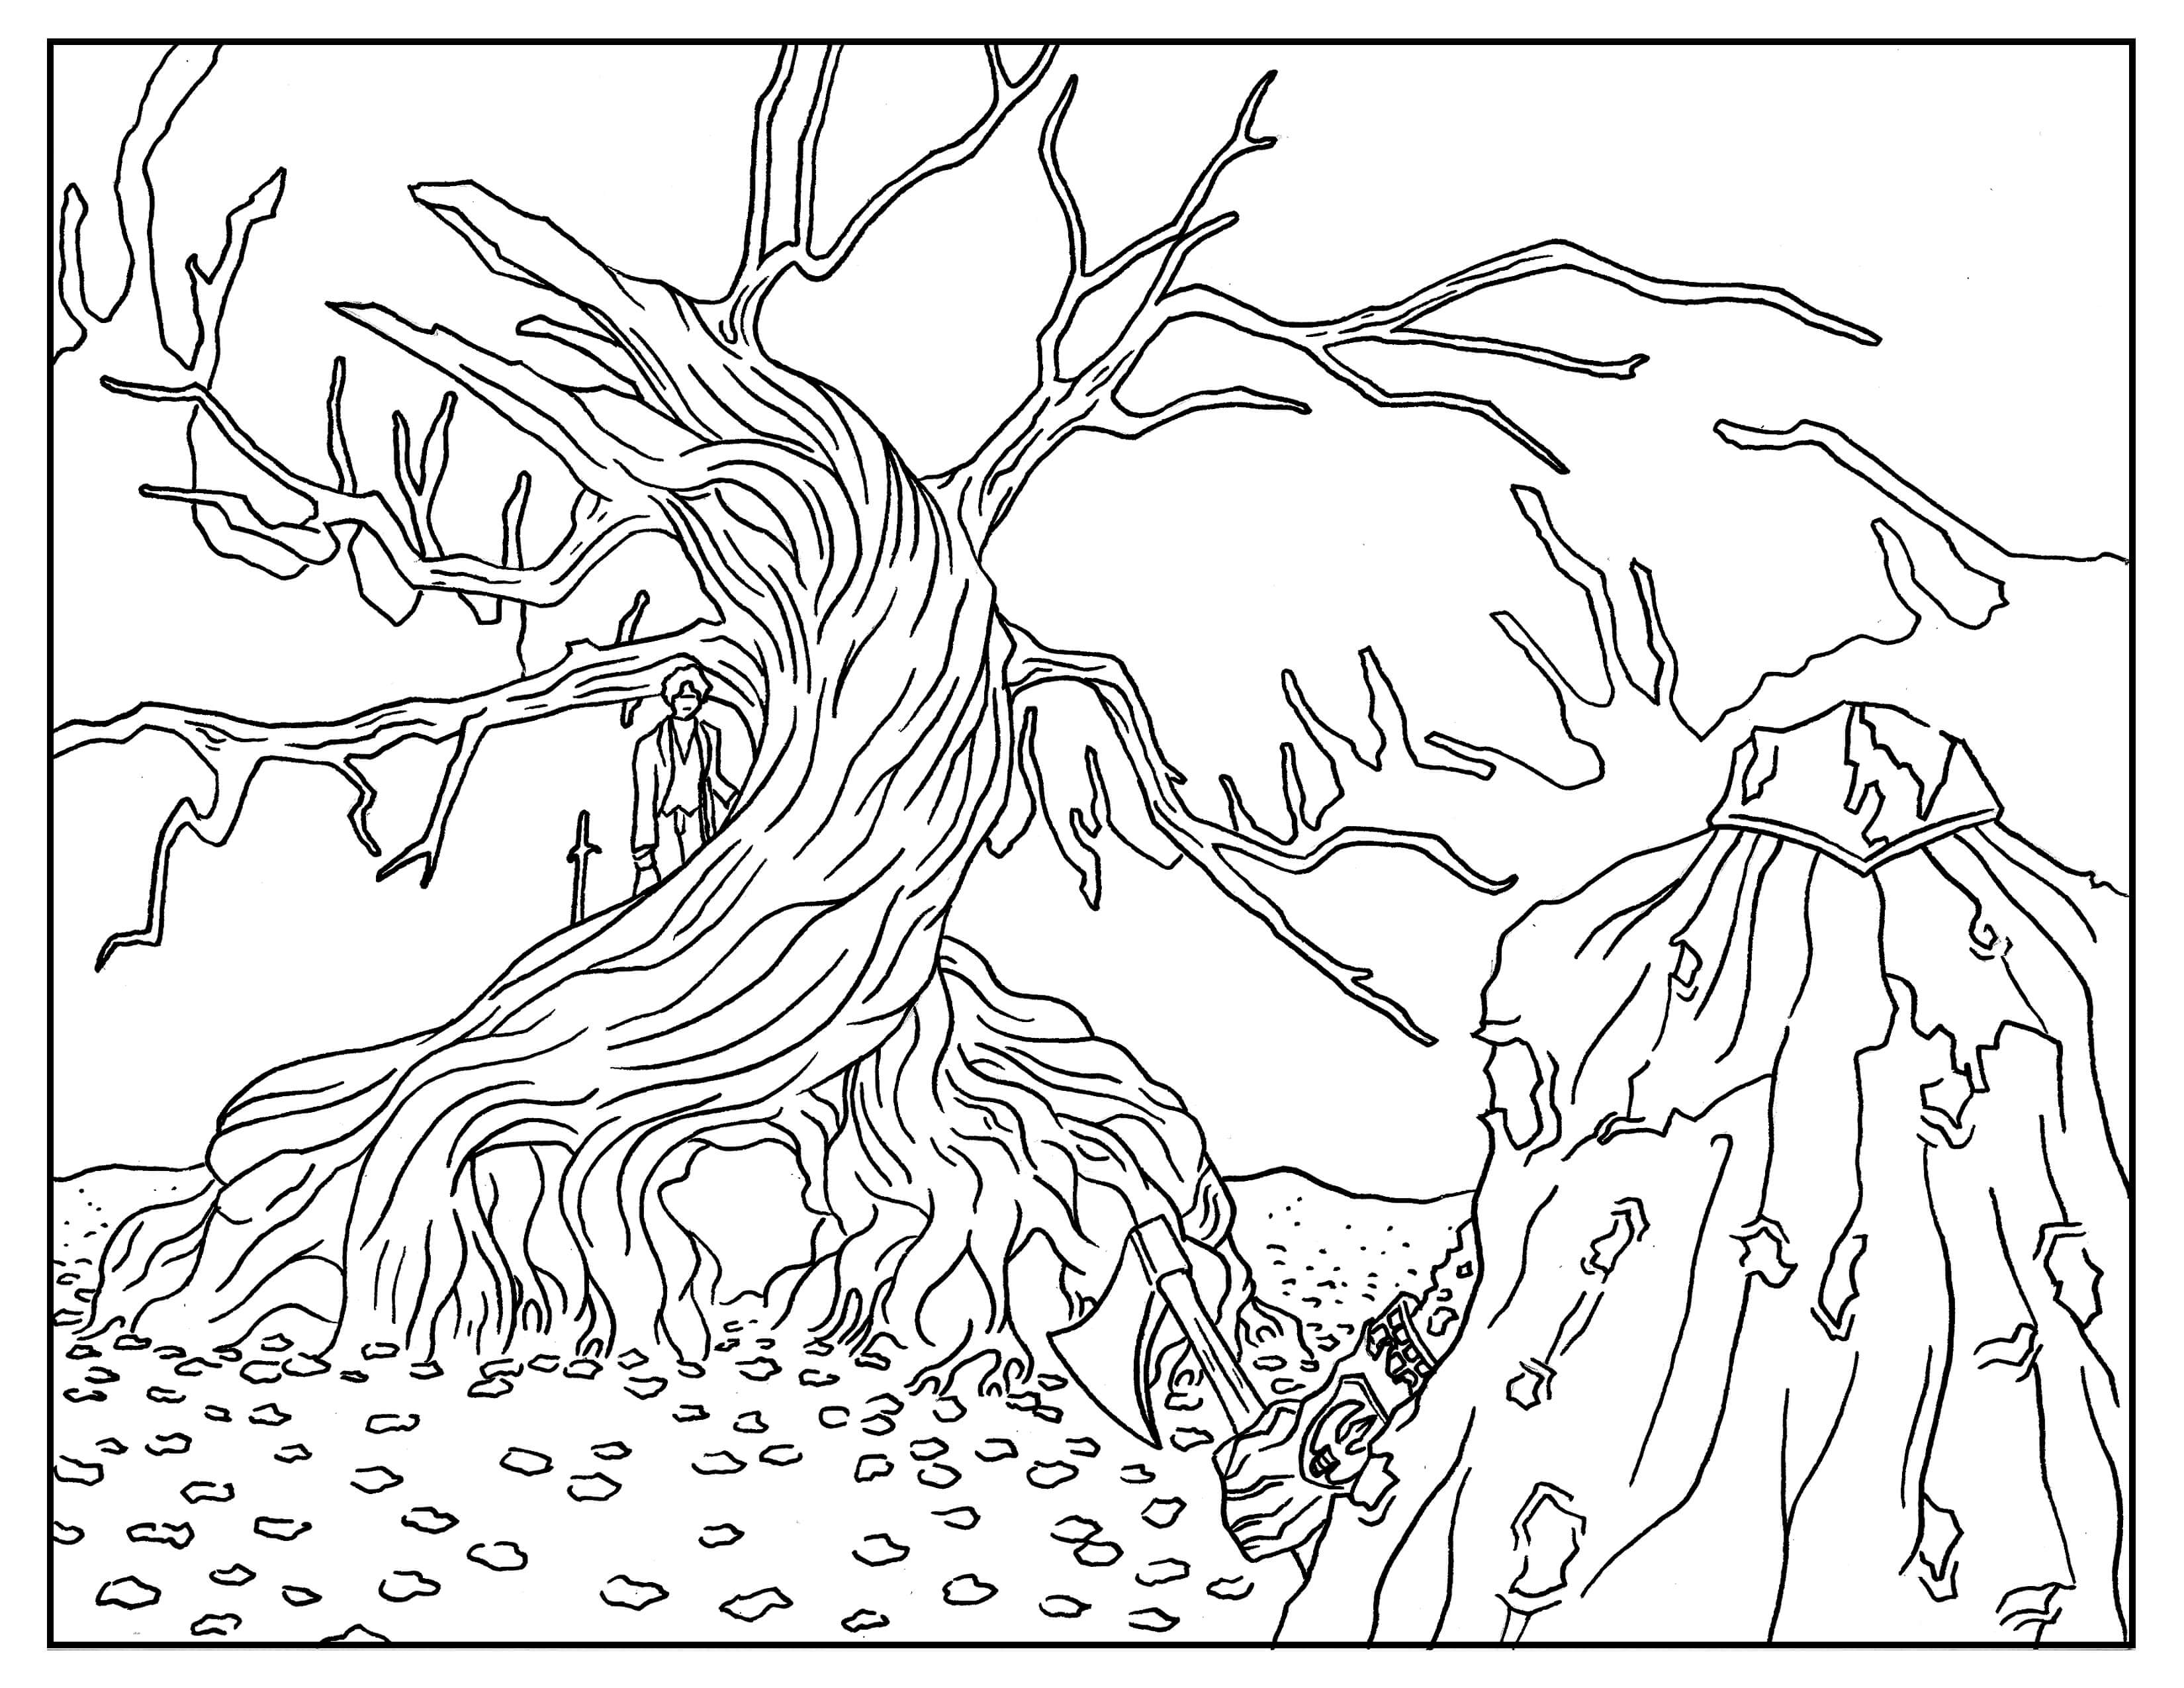 Sleepy Hollow Adult Coloring Book Page